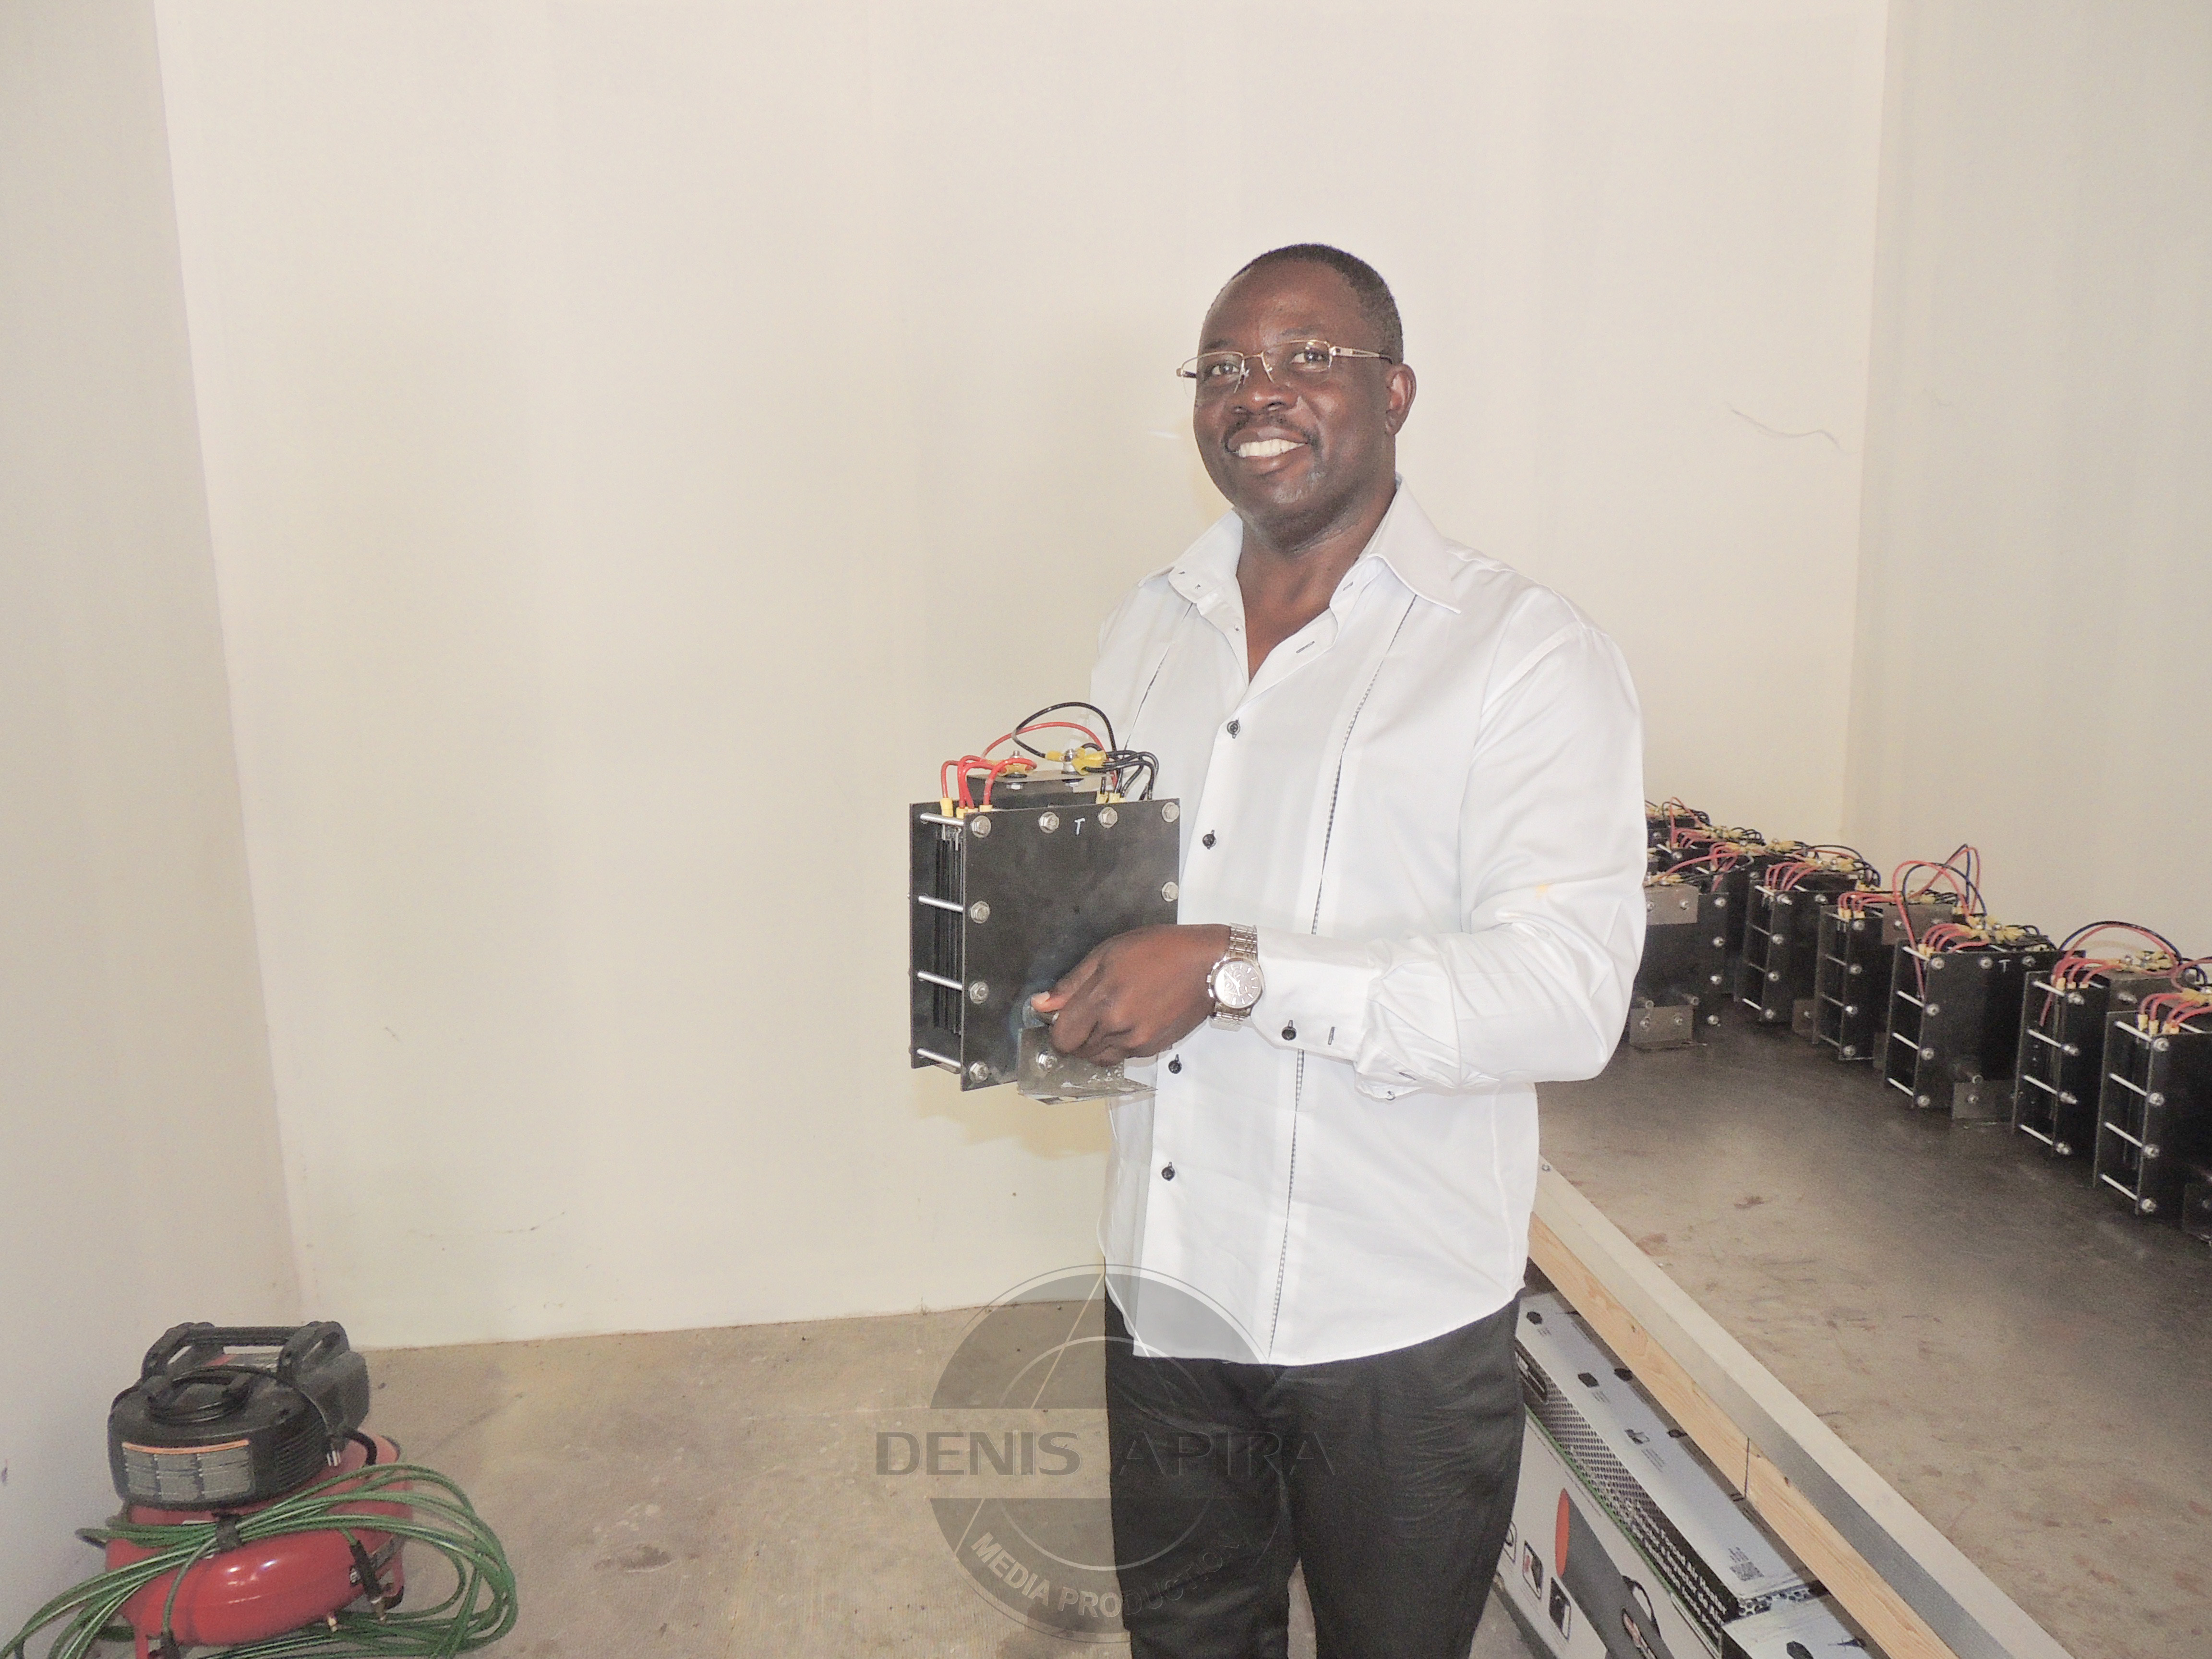 The Dallas-based Mr. Marvin Apira, the newly appointed representative of the company in East Africa holding the Hydro-Gen25 generator.